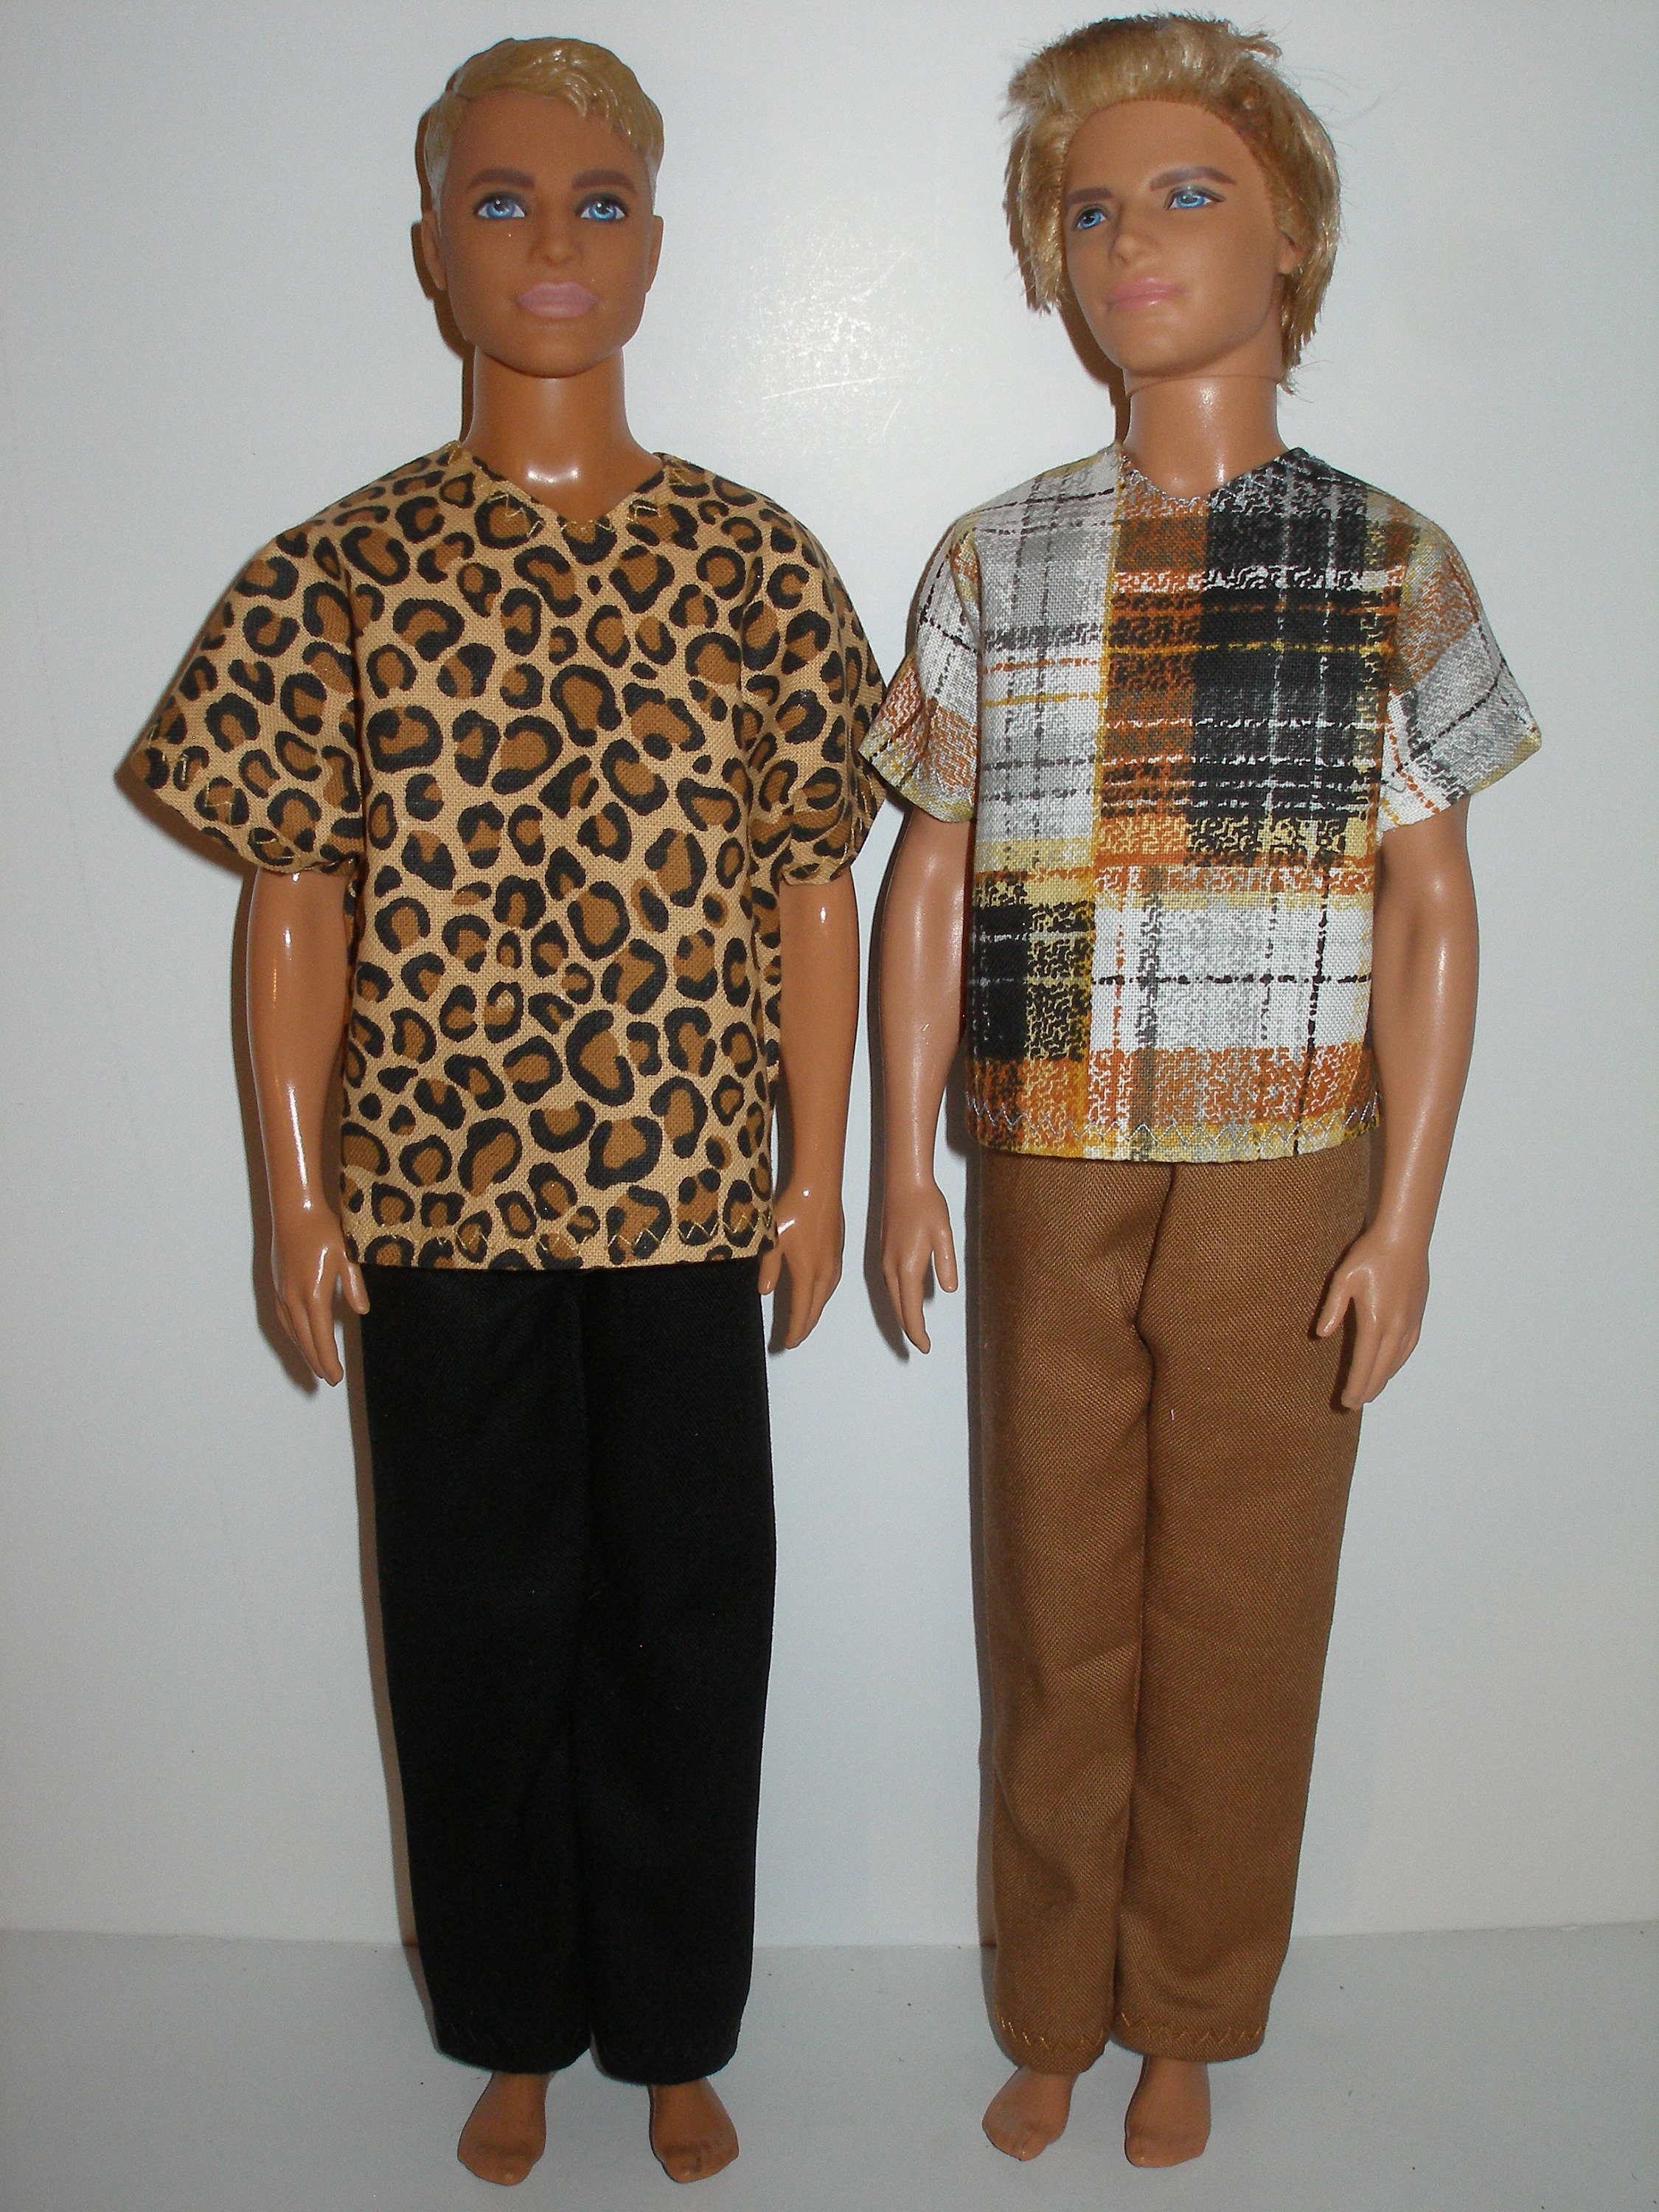 Handmade 12 Male Fashion Doll Clothes Fits Ken 4 Piece Mix and Match Set 